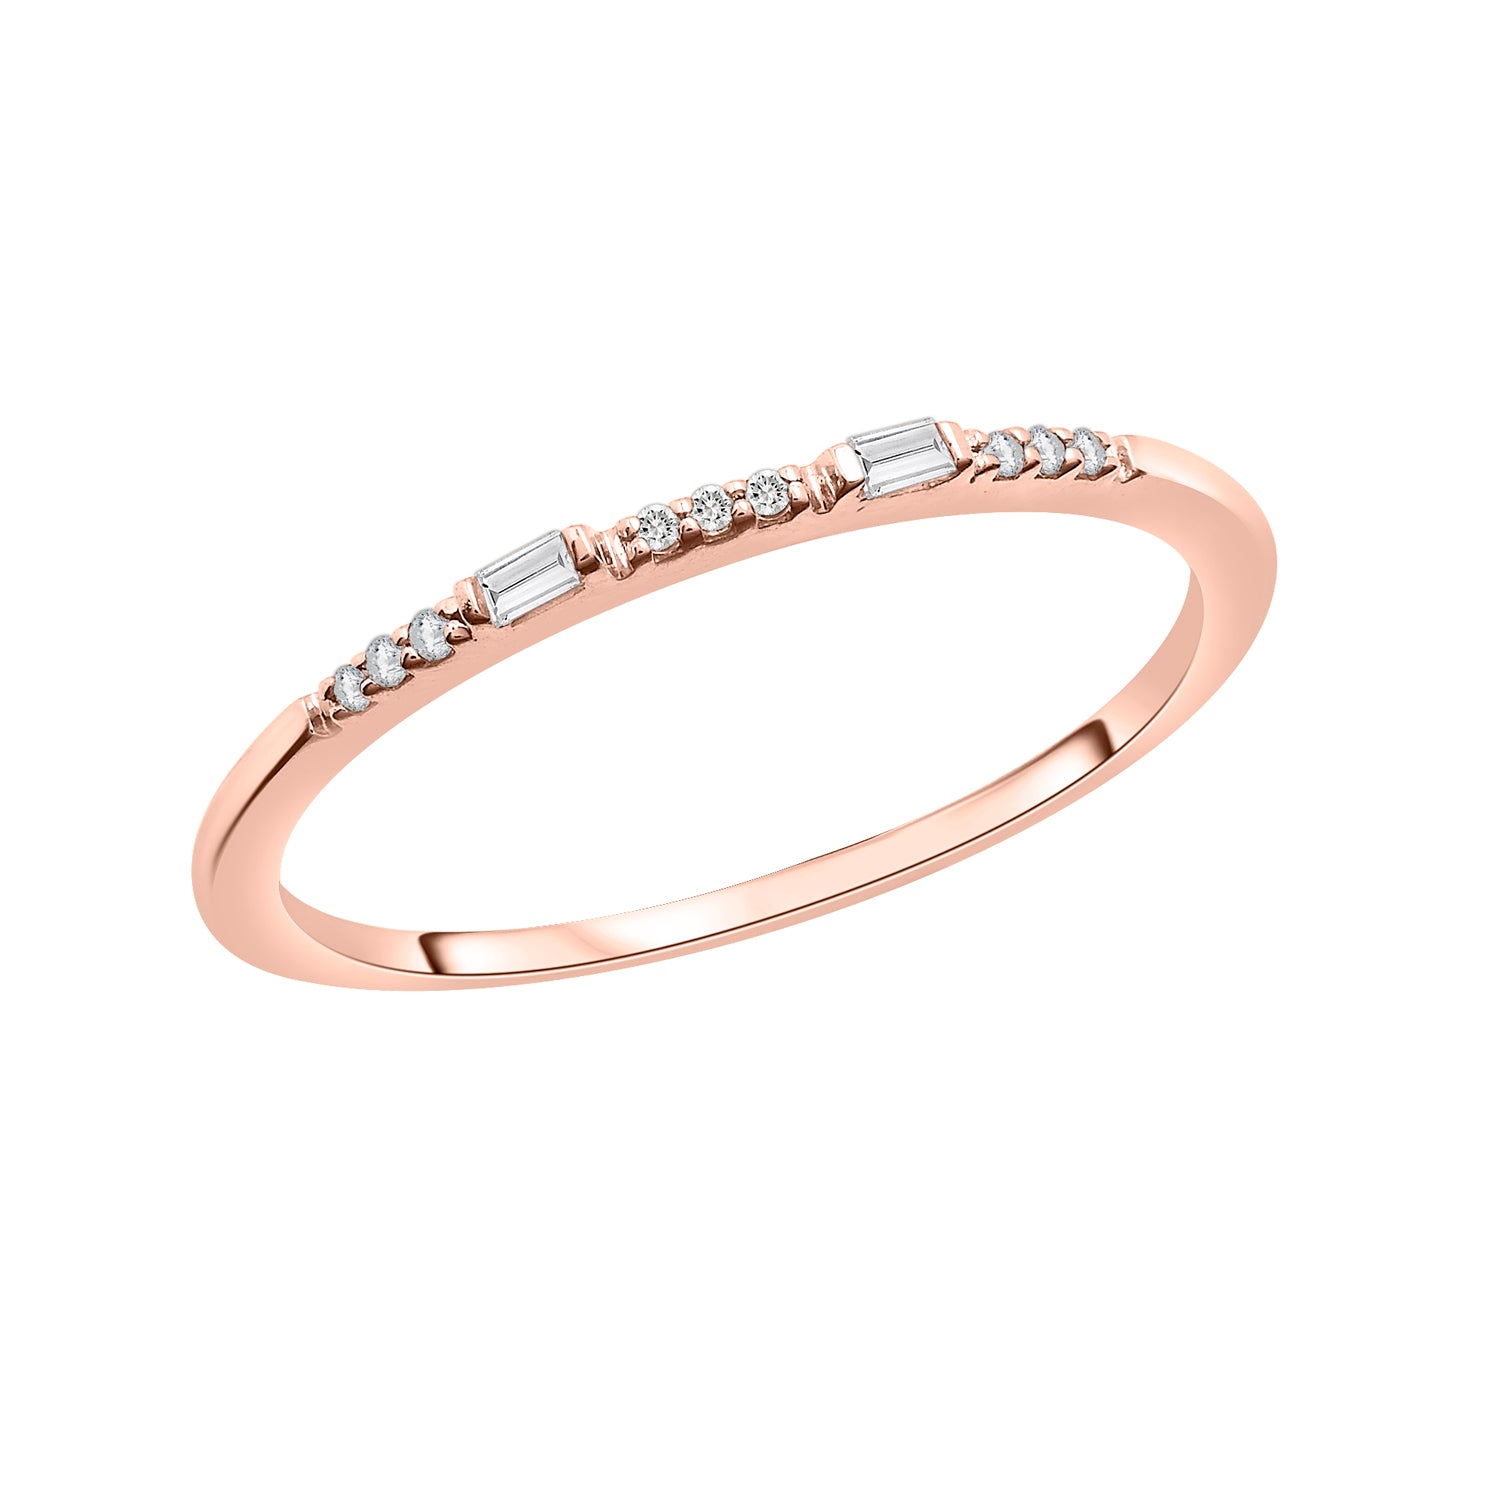 Reese Linear Diamond Ring in Rose Gold